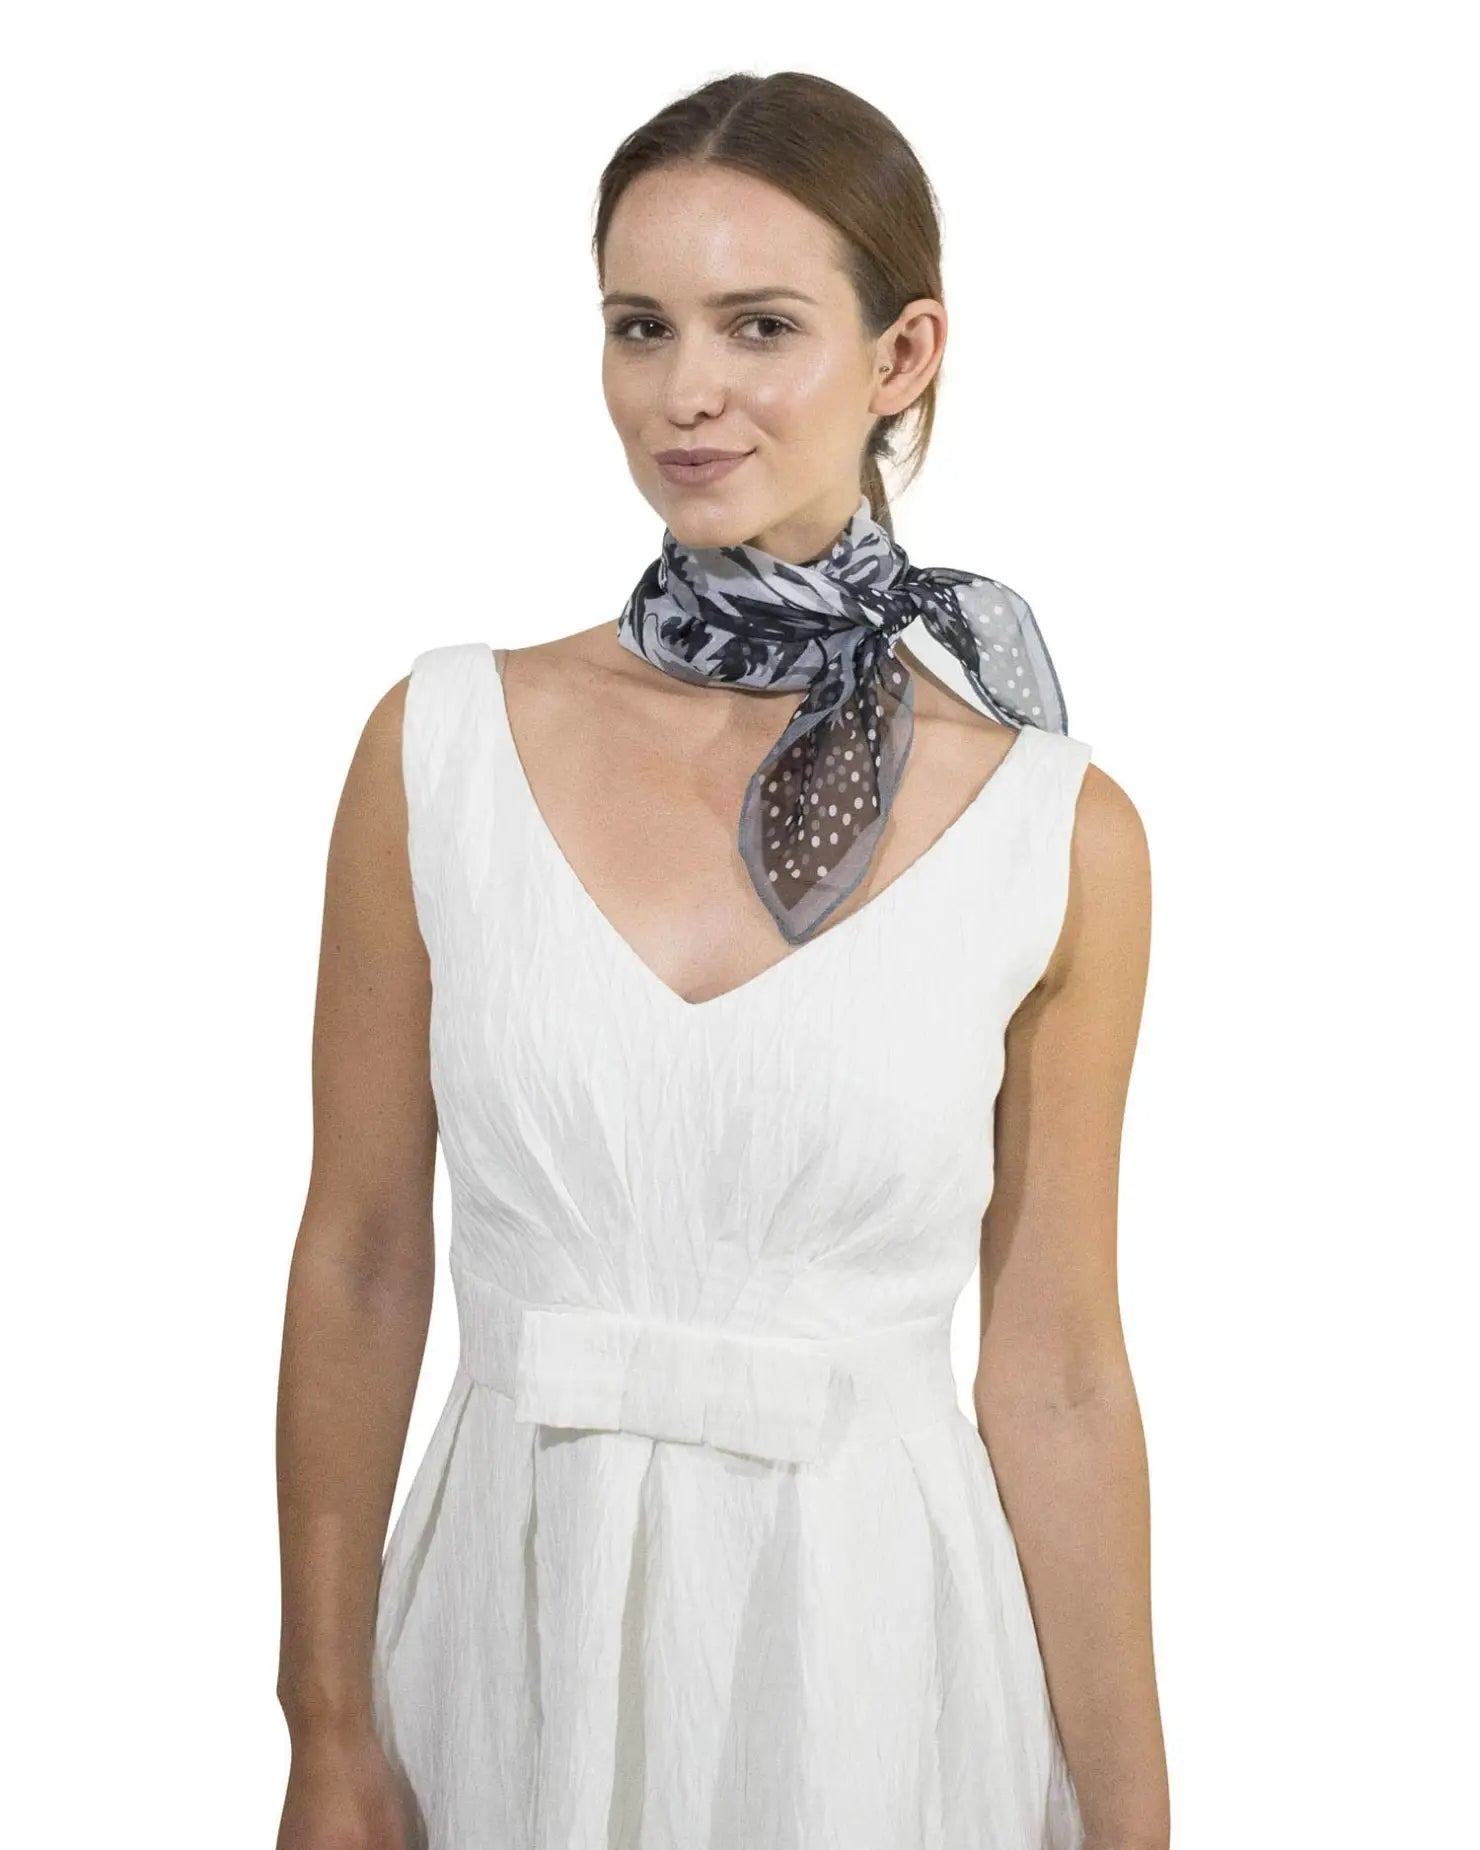 Woman in white dress and polka dot floral small square scarf